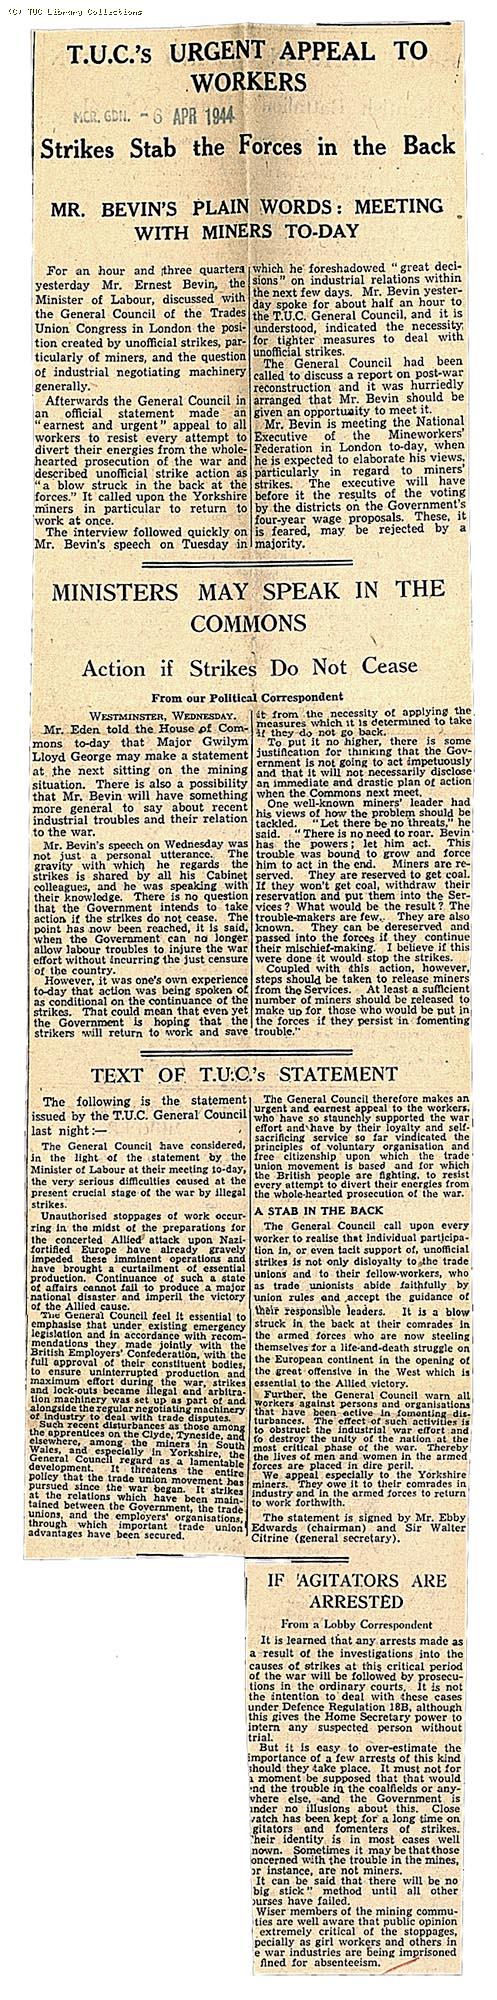 TUC's urgent appeal to workers, 1944